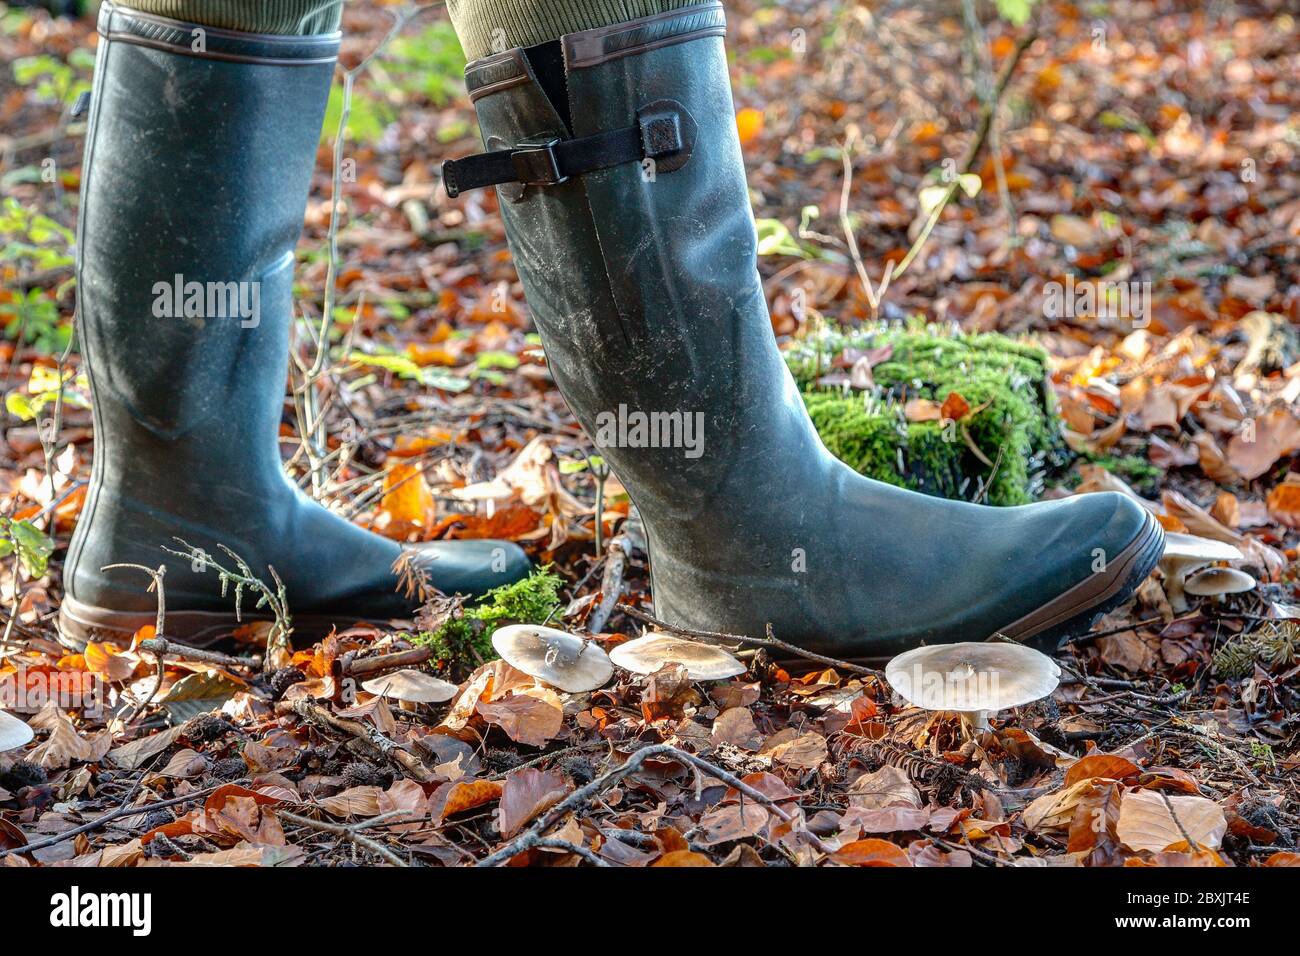 For hunters, mushroom pickers and hikers, wellies are the right shoes to walk through the autumn forest. Stock Photo